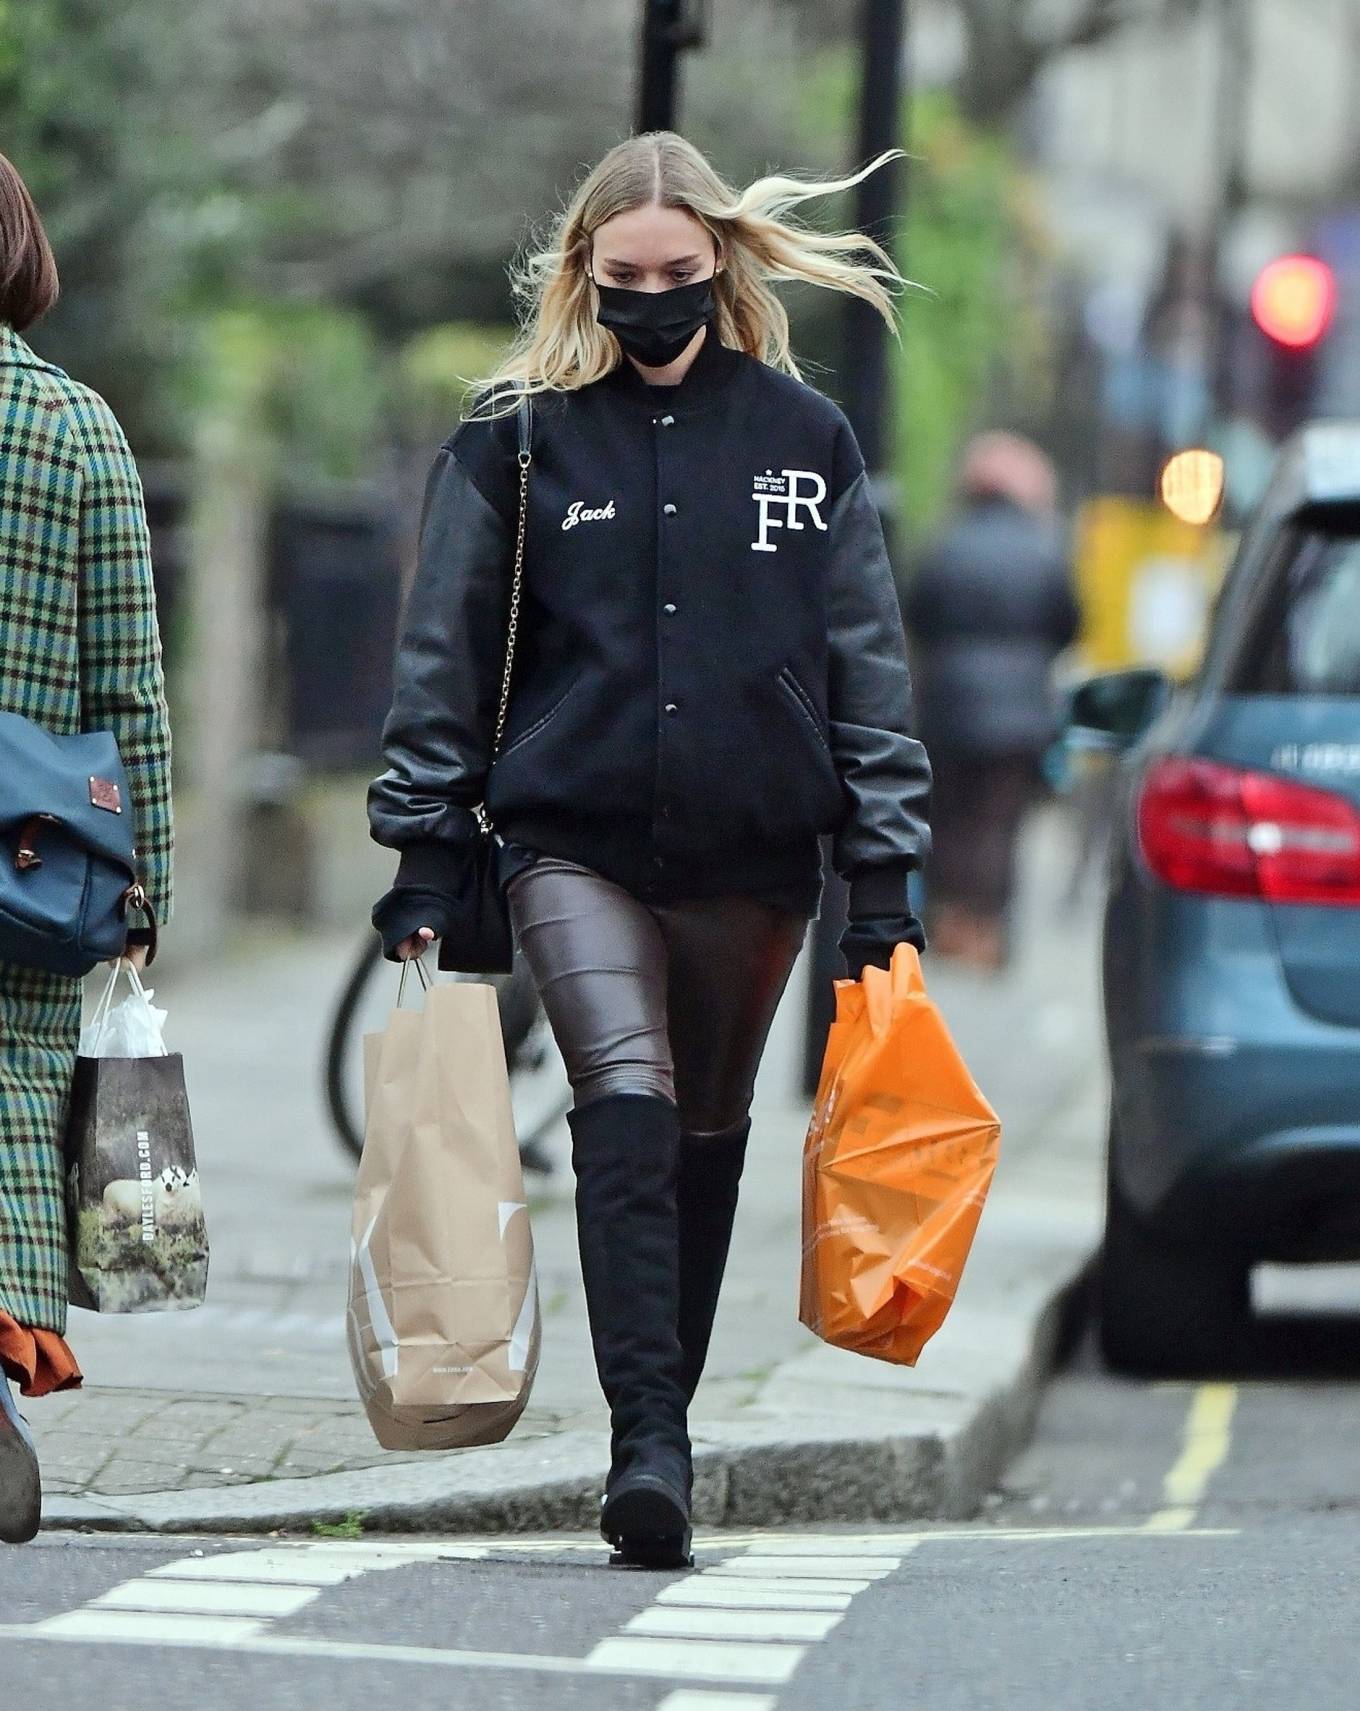 Roxy Horner - Steps out in London's Notting Hill